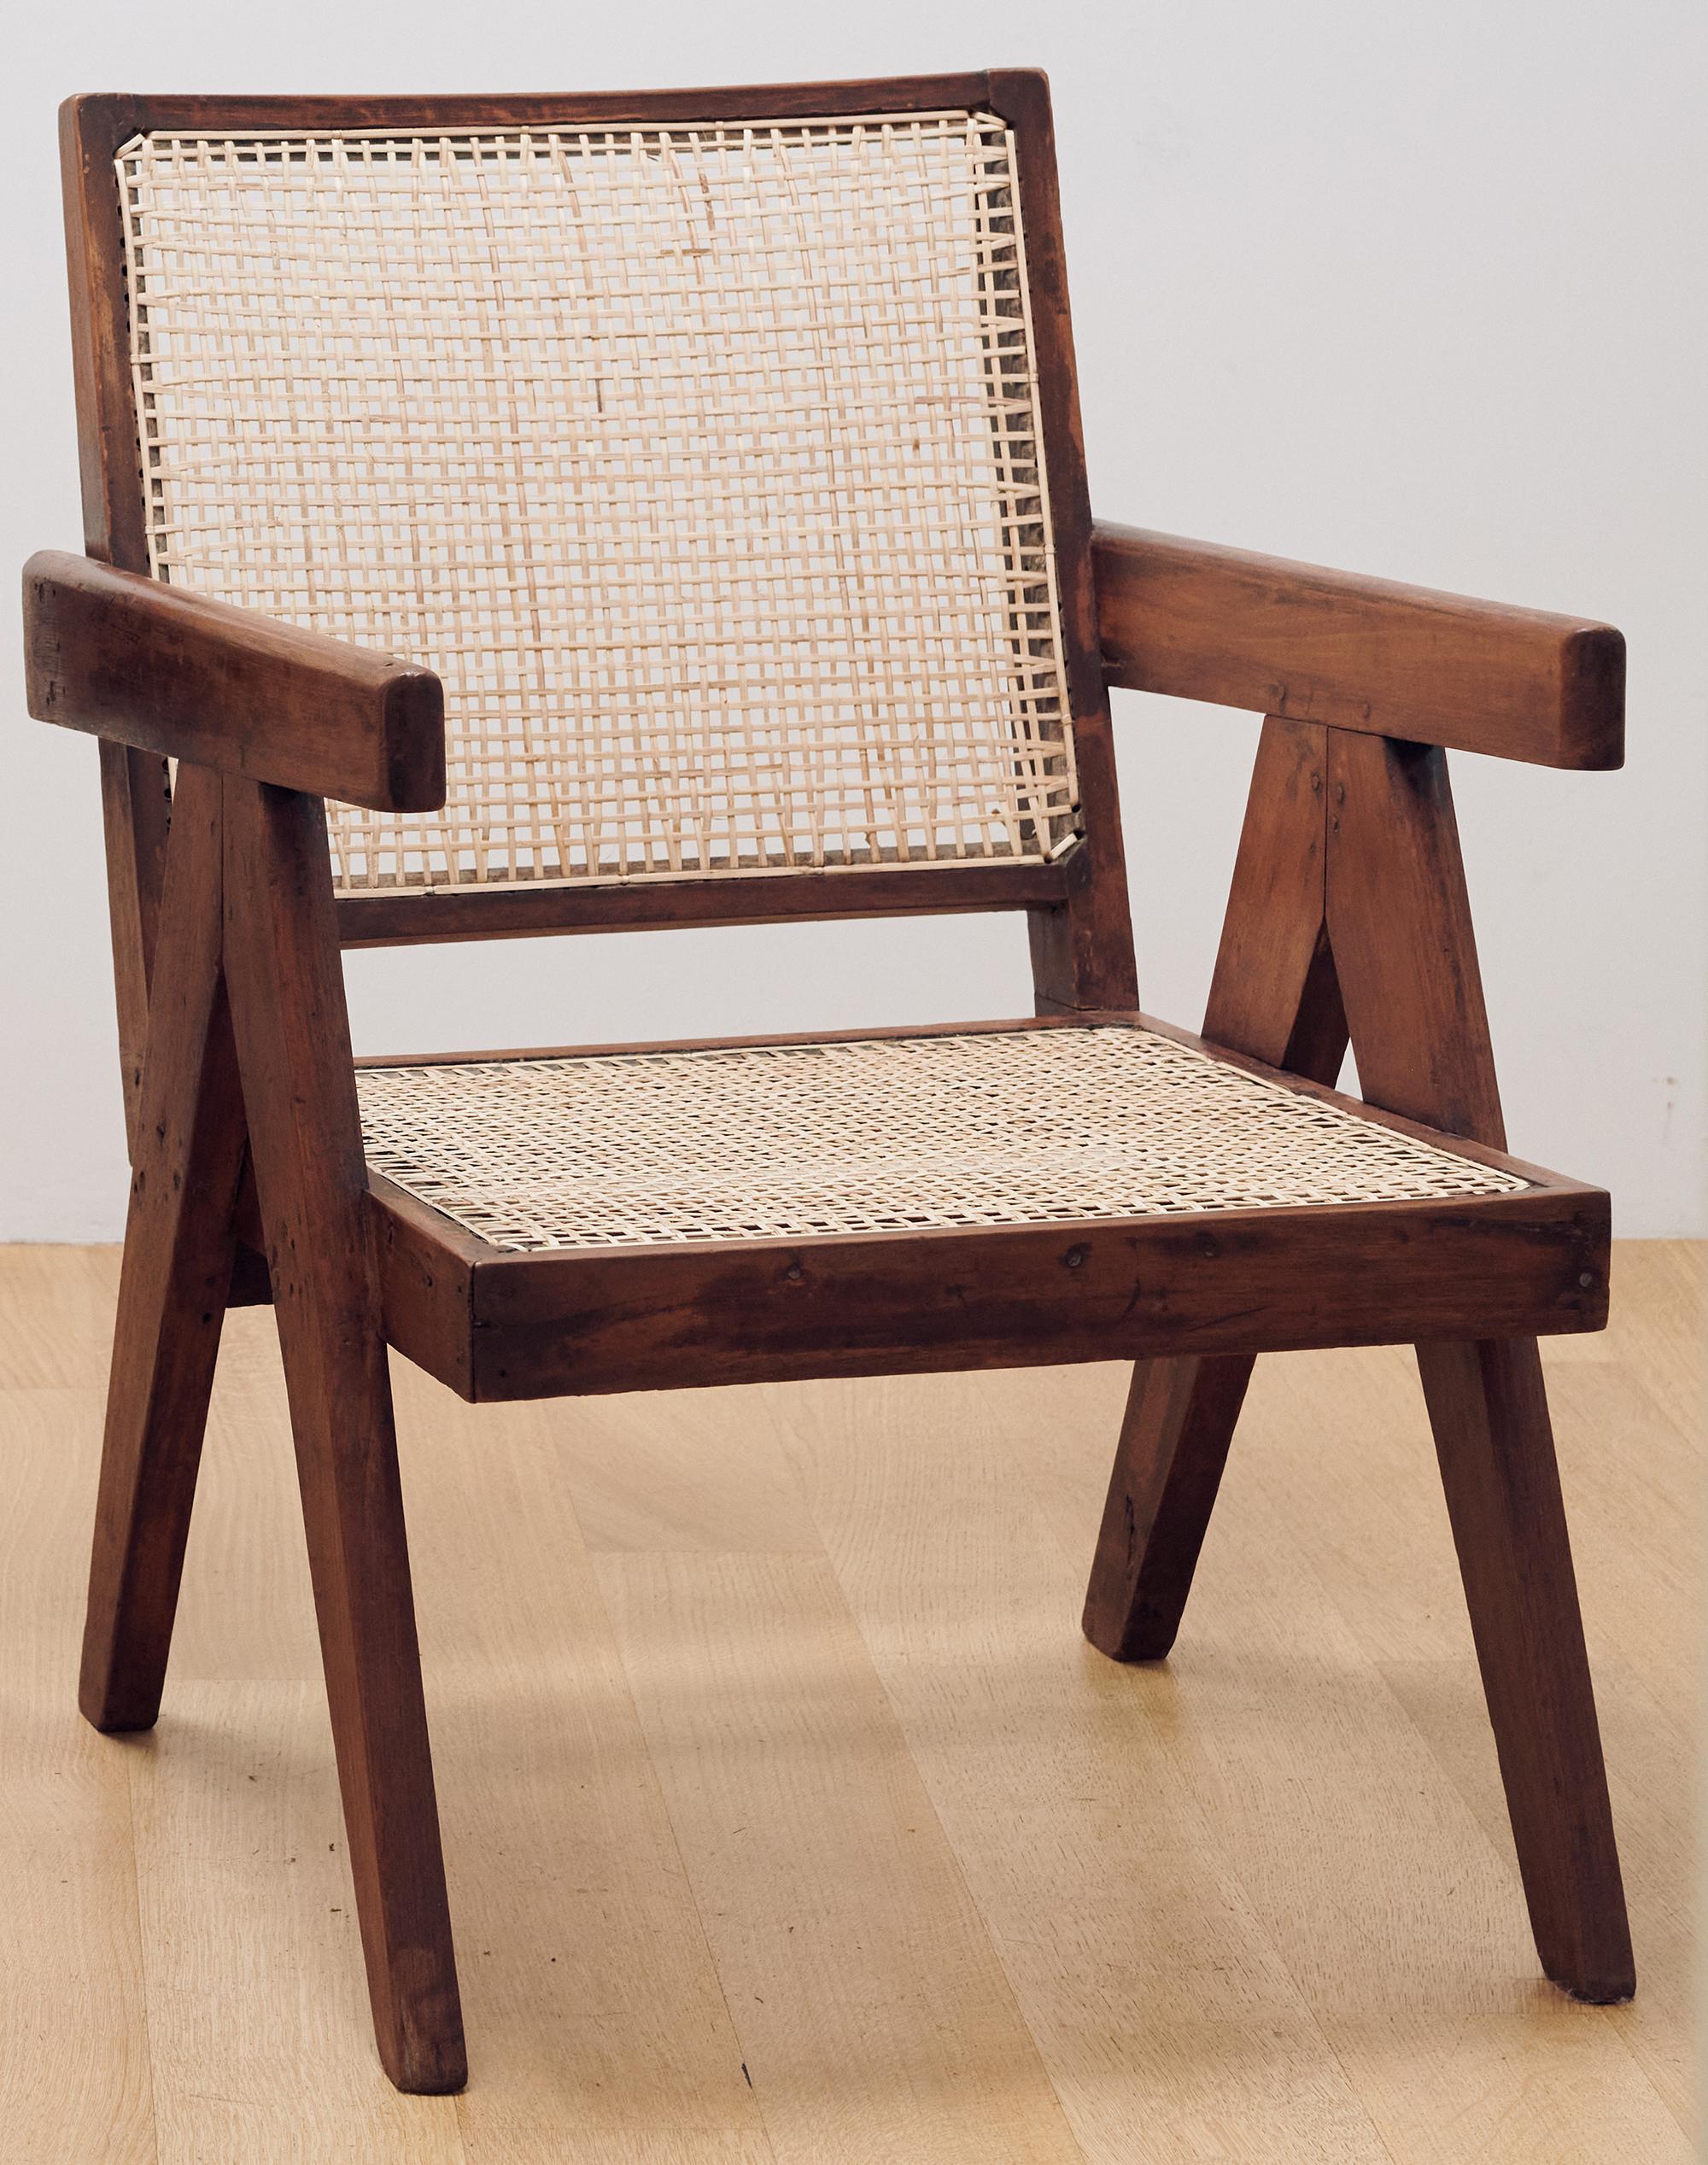 Beautiful antique Easy armchair designed by Pierre Jeanneret for the various public buildings of Chandigarh in the Punjab region of India in the 1950s. Model no. PJ-SI-29-A.* These are solid teak chairs and have been re-caned, there's a patina which